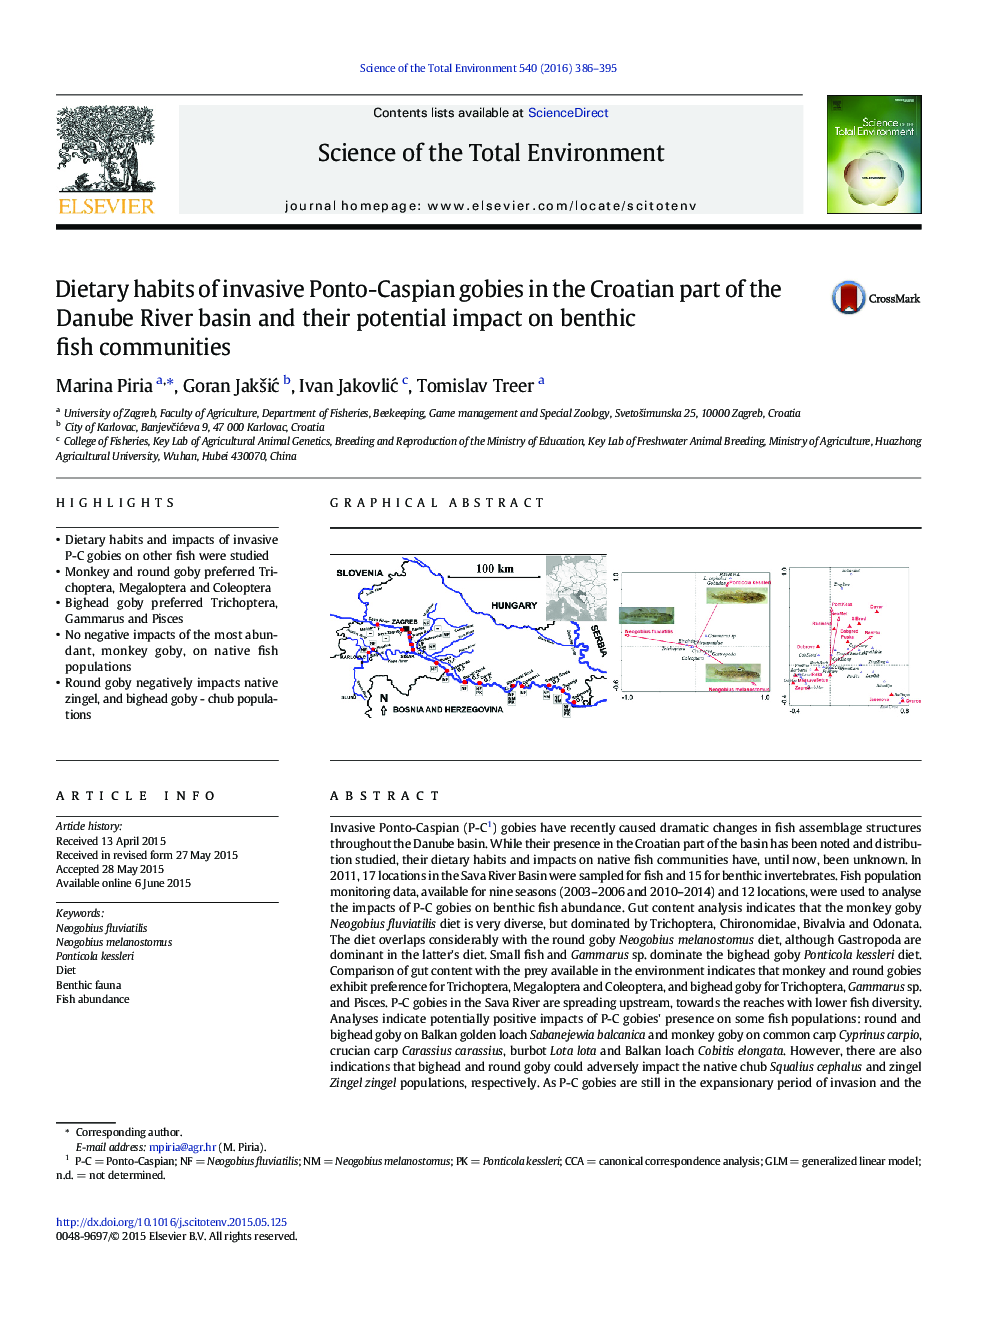 Dietary habits of invasive Ponto-Caspian gobies in the Croatian part of the Danube River basin and their potential impact on benthic fish communities